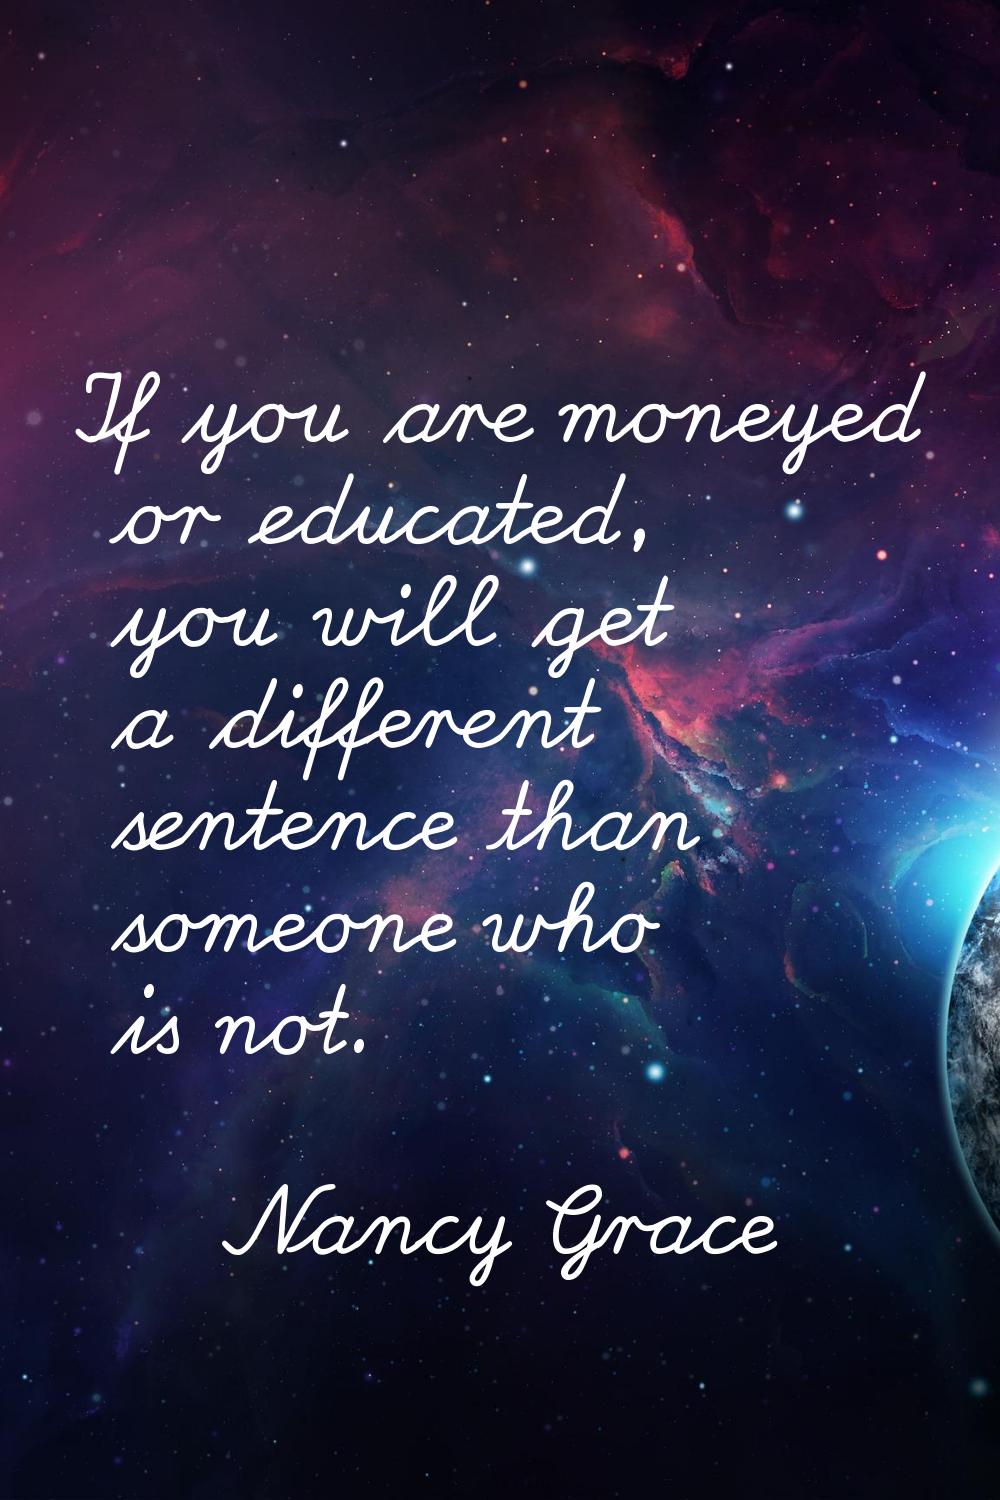 If you are moneyed or educated, you will get a different sentence than someone who is not.